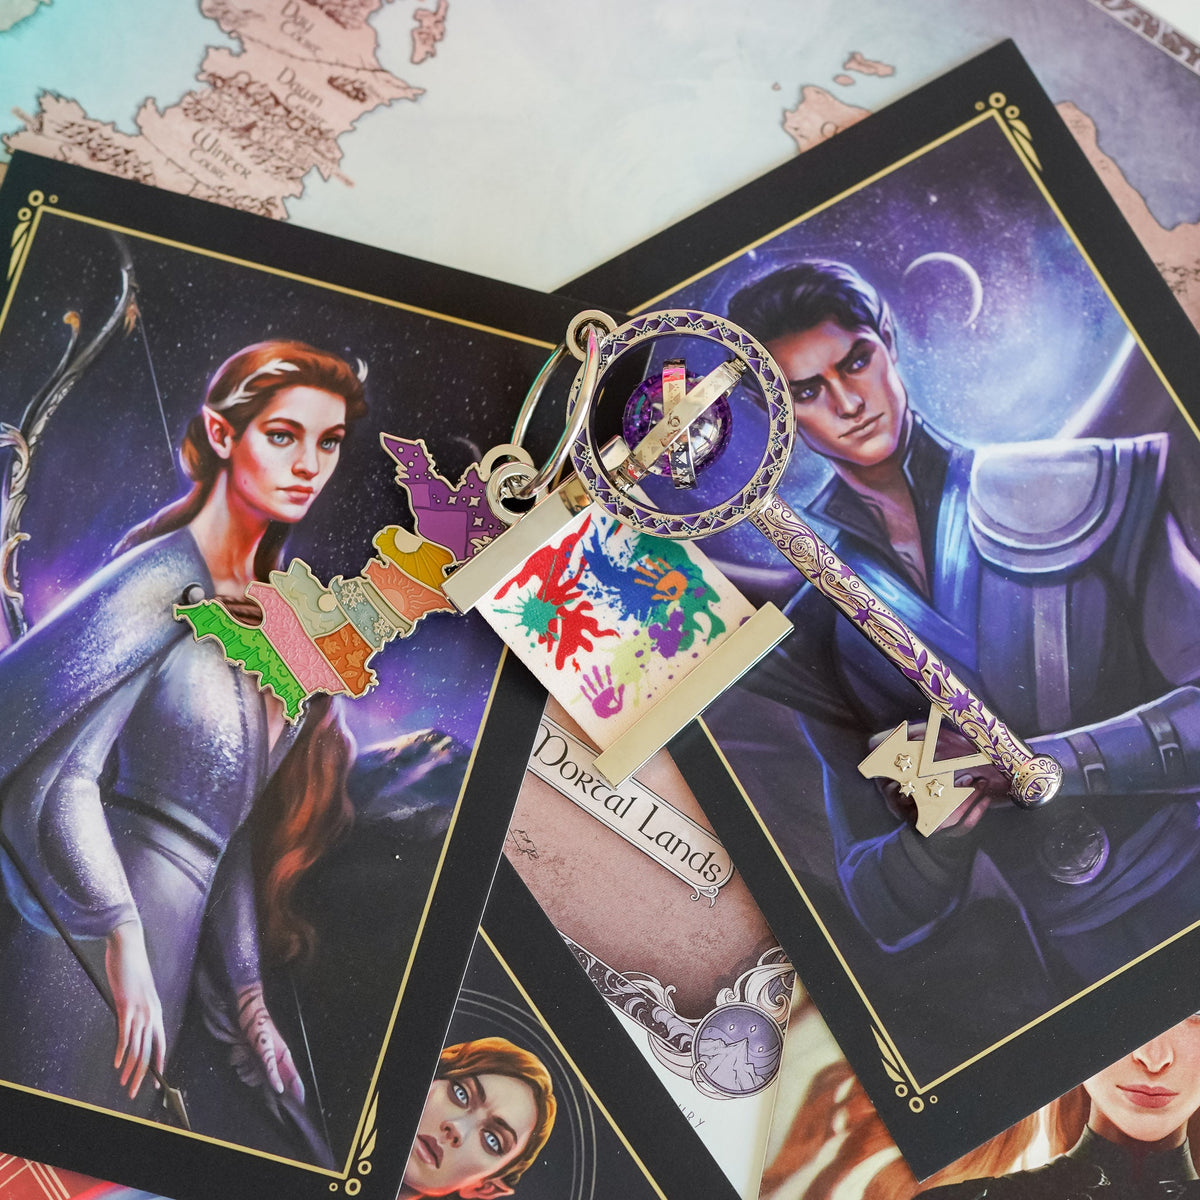 ACOTAR Collectible Key with a glitter bubble, tattoos on the key shaft, a Prythian Courts Charm, and a Canvas Charm